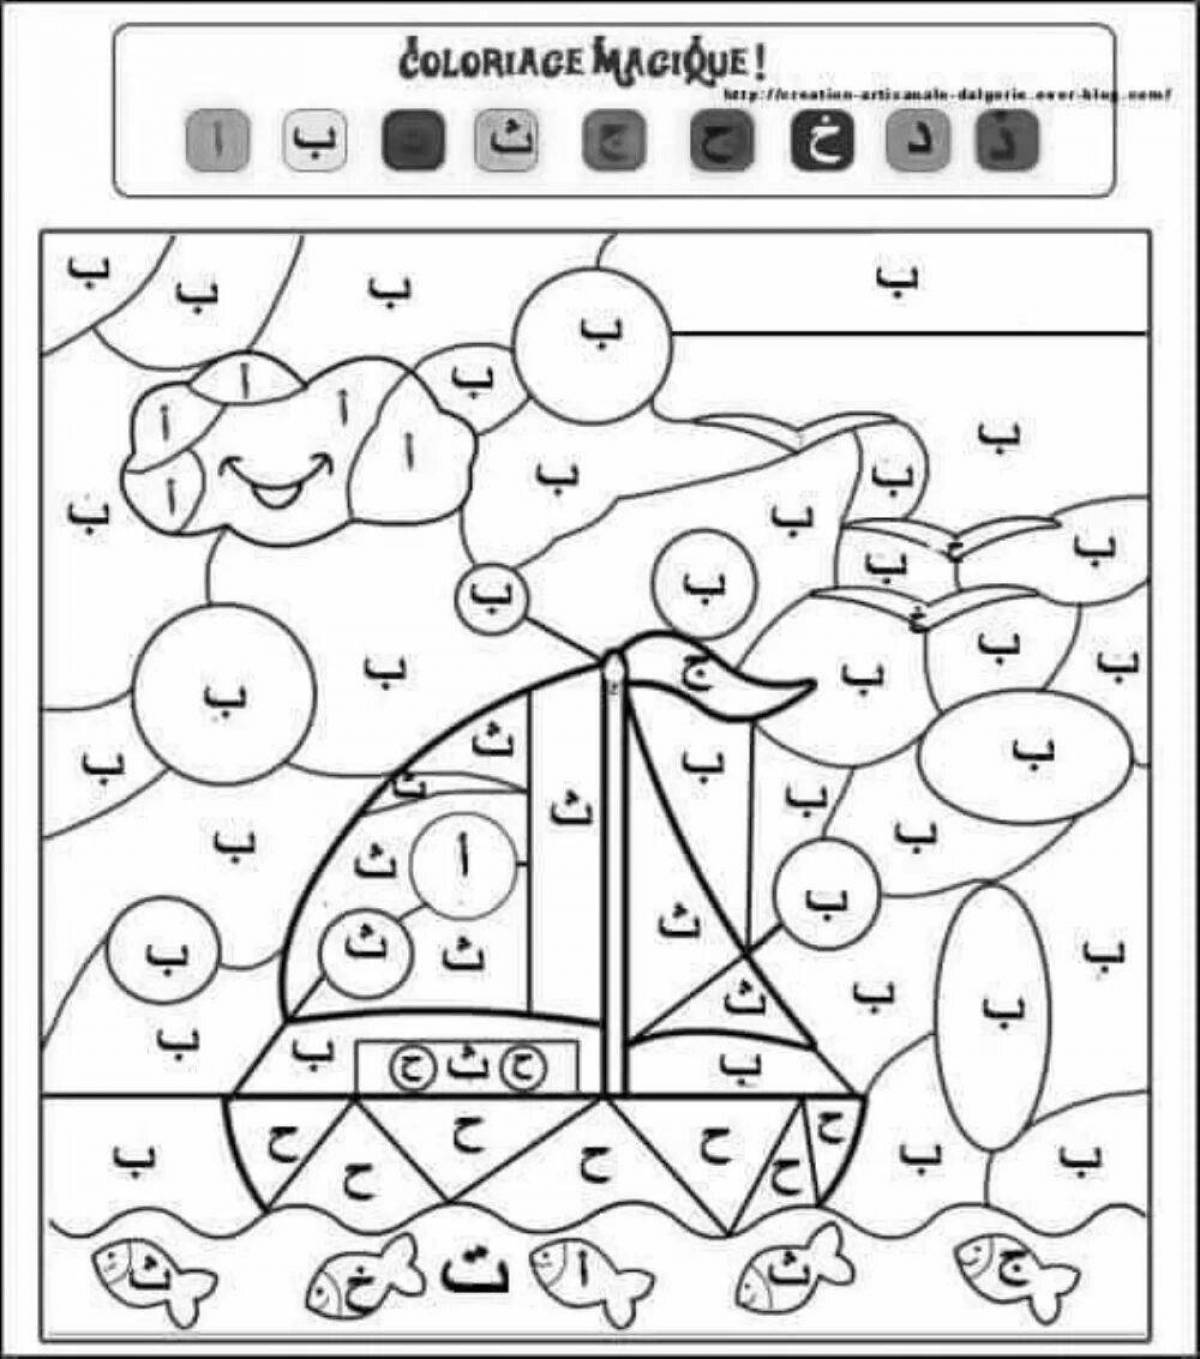 Colorful Arabic alphabet coloring page for kids of all faiths